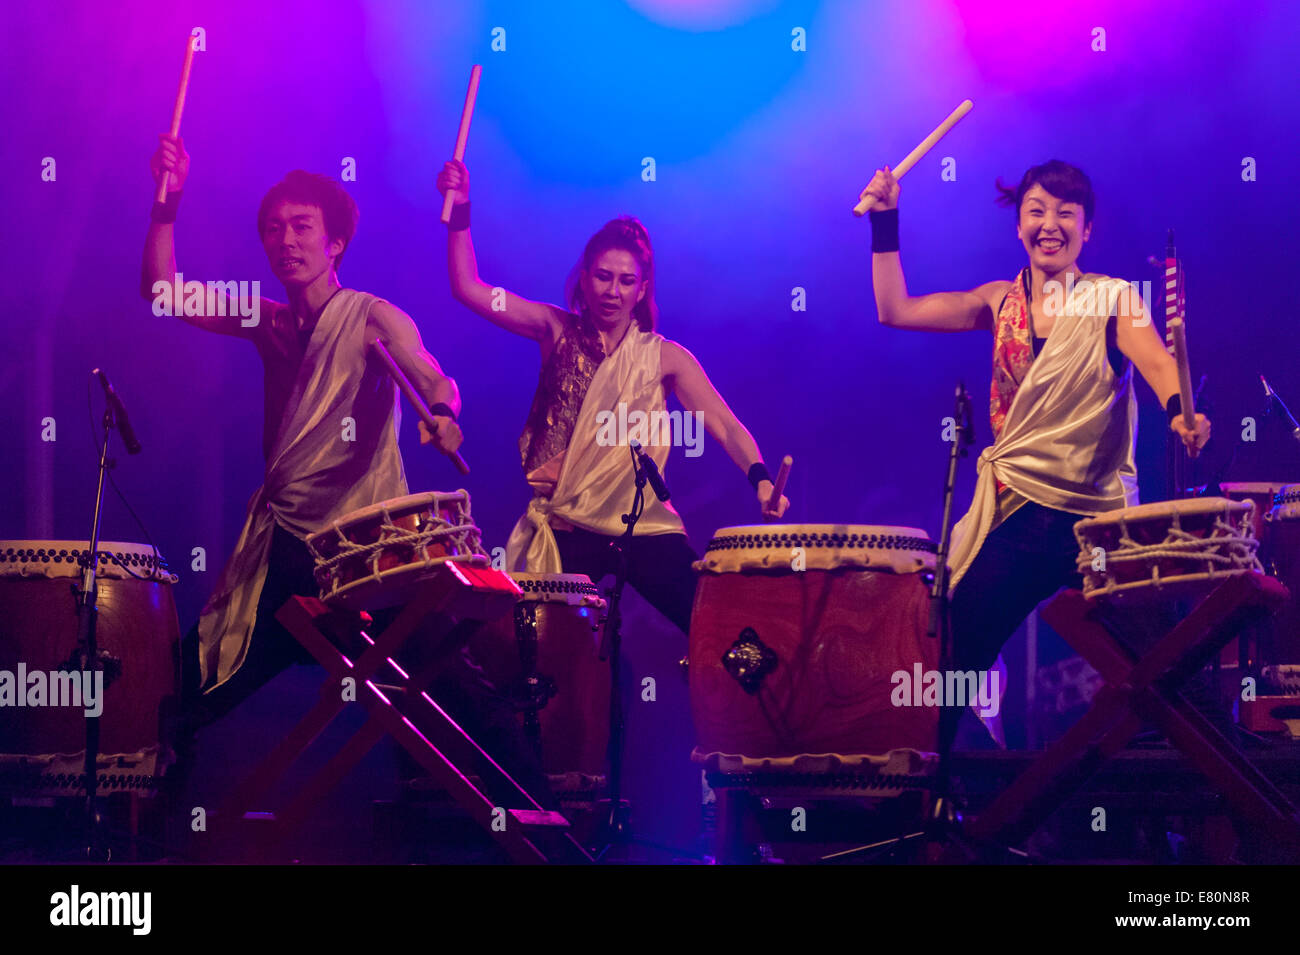 London, UK, 27 September 2014. The sixth Japan Matsuri takes place in Trafalgar Square in front of an audience of thousands of Londoners.  The  annual festival showcases many aspects of Japanese culture.  Pictured: Joji Hirota London Taiko Drummers perform the Grand Finale.  Credit:  Stephen Chung/Alamy Live News Stock Photo